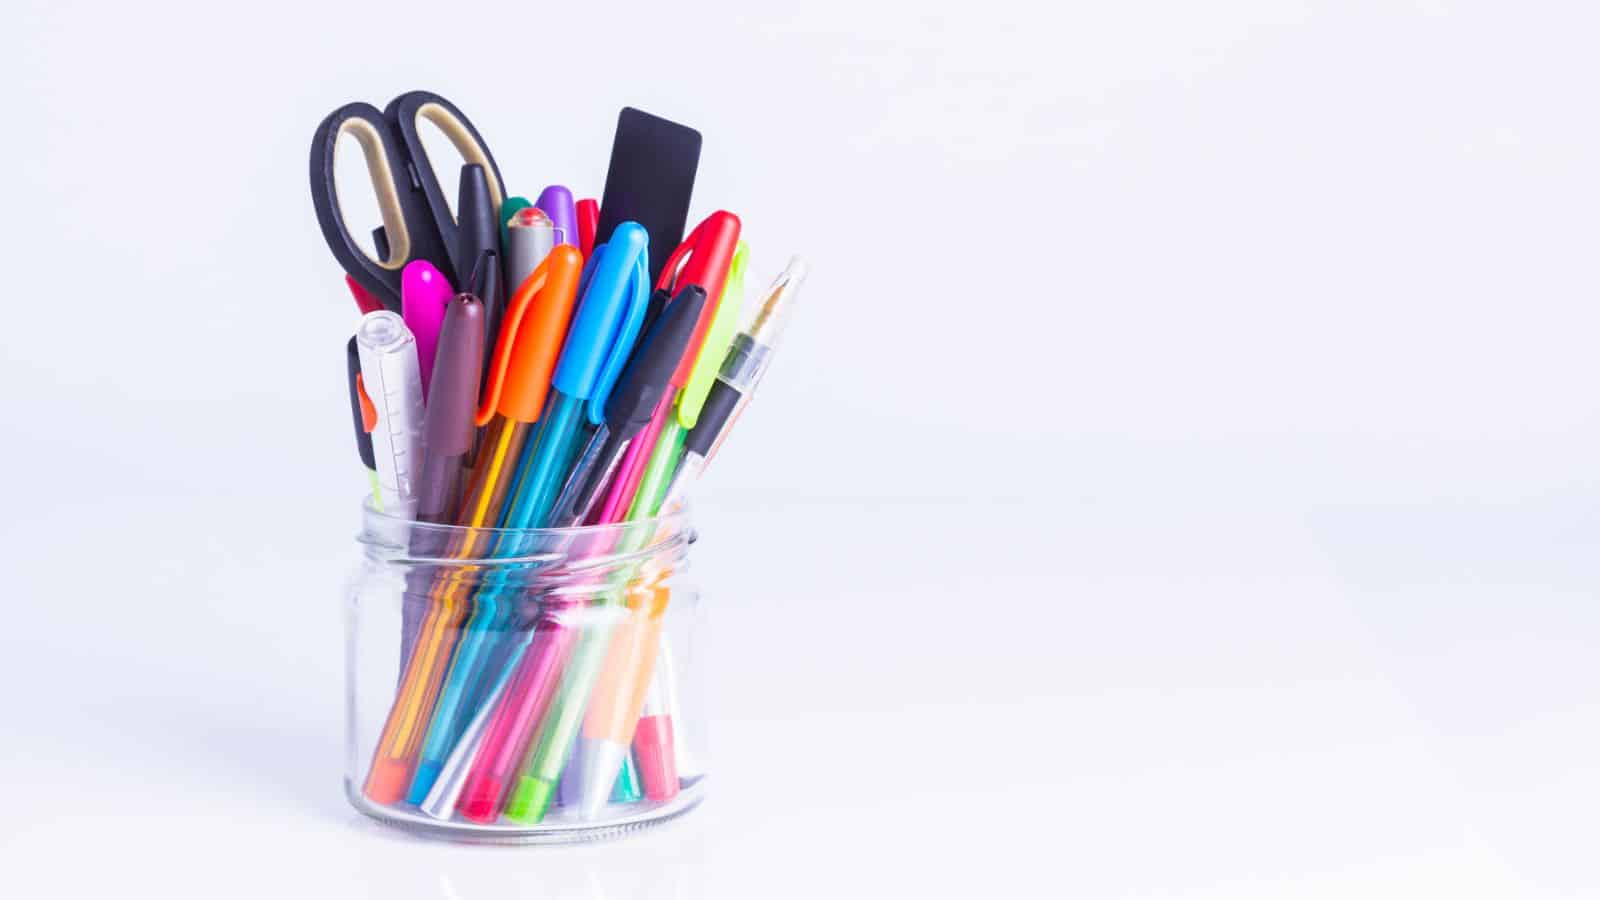 pens and markers in a glass jar